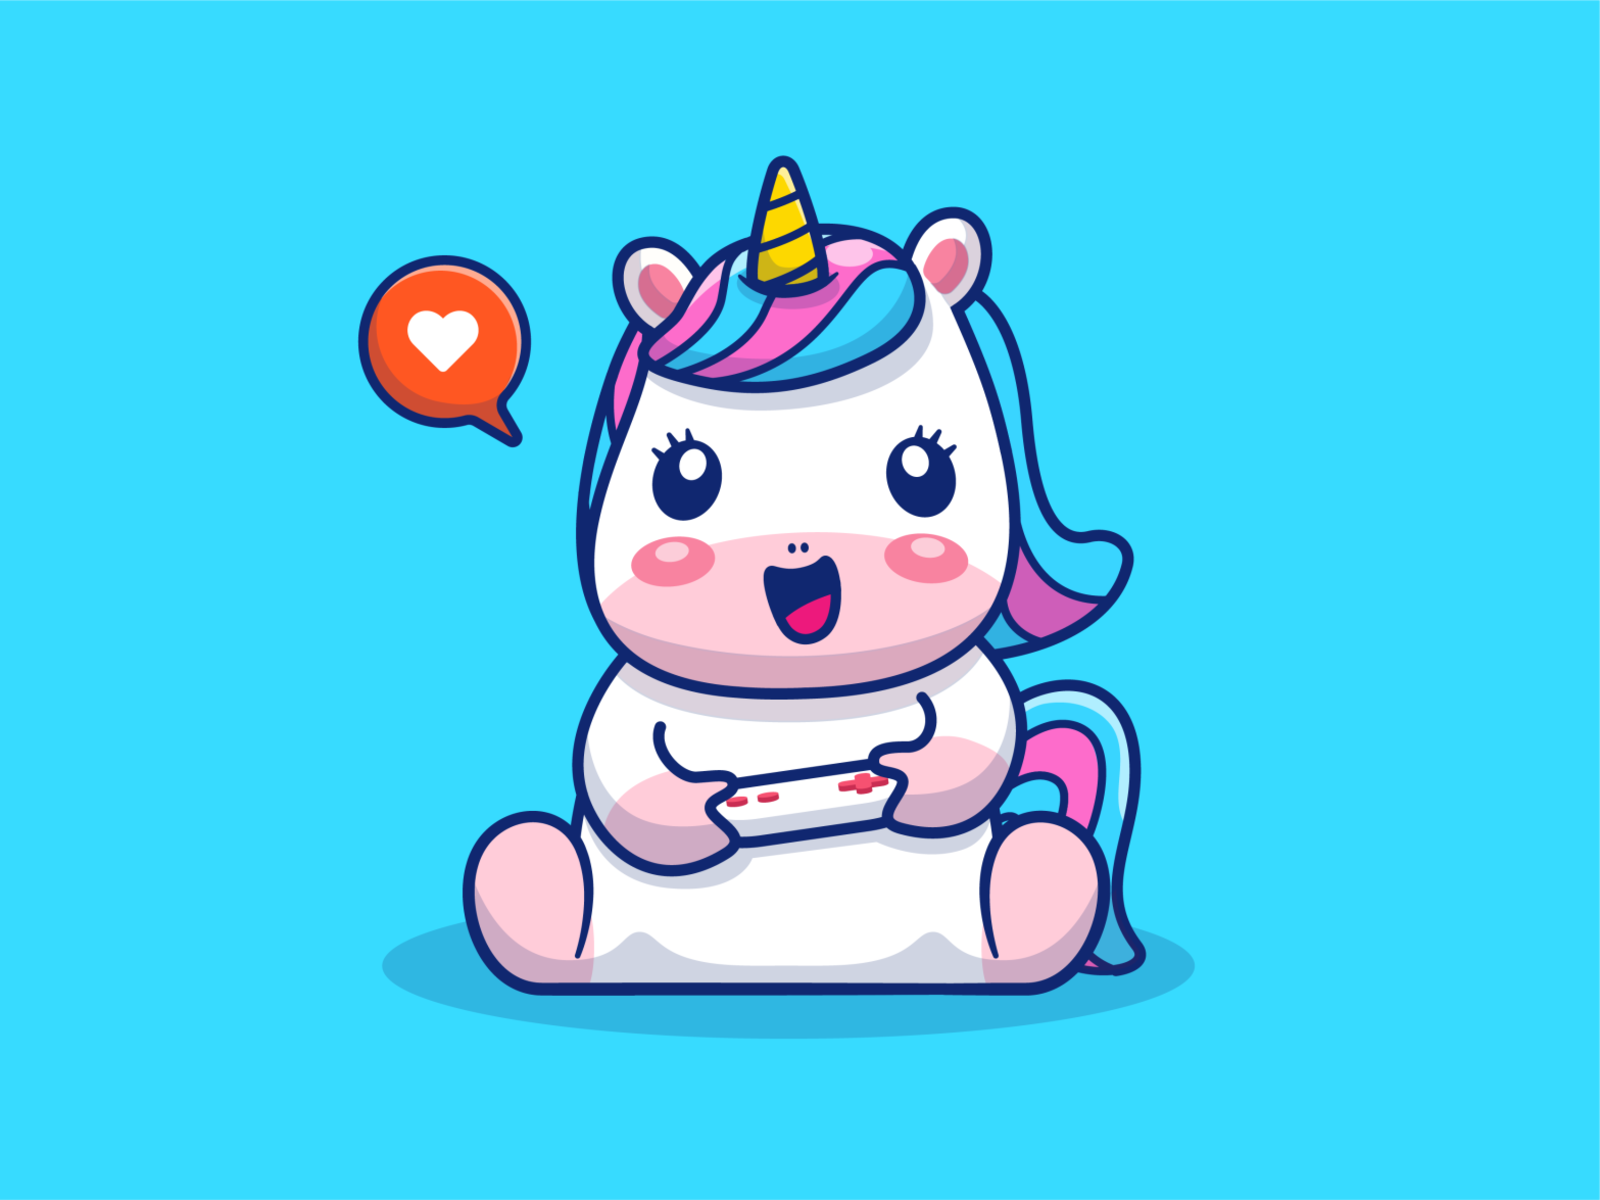 Unicorn Gaming!! 🦄🎮😁😁 by catalyst on Dribbble